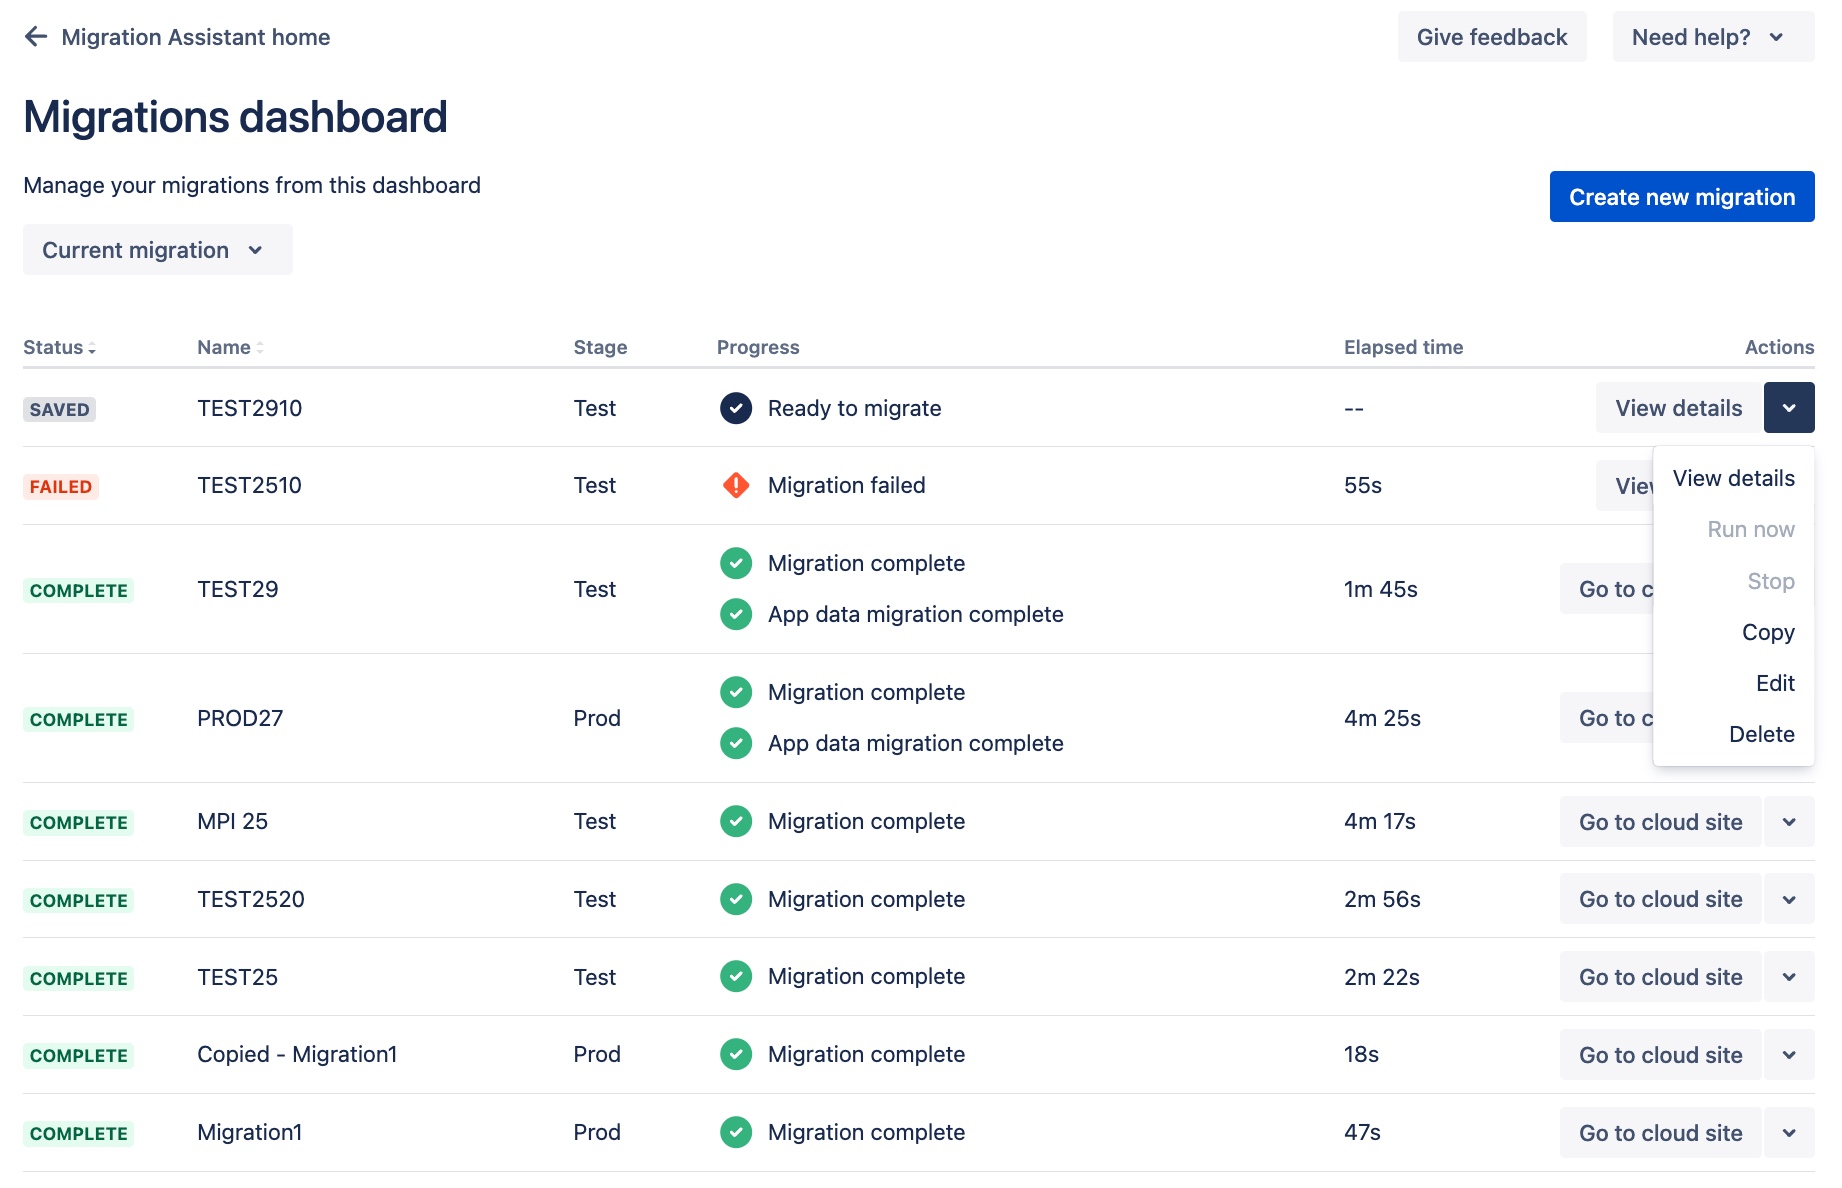 Actions and status on migrations dashboard